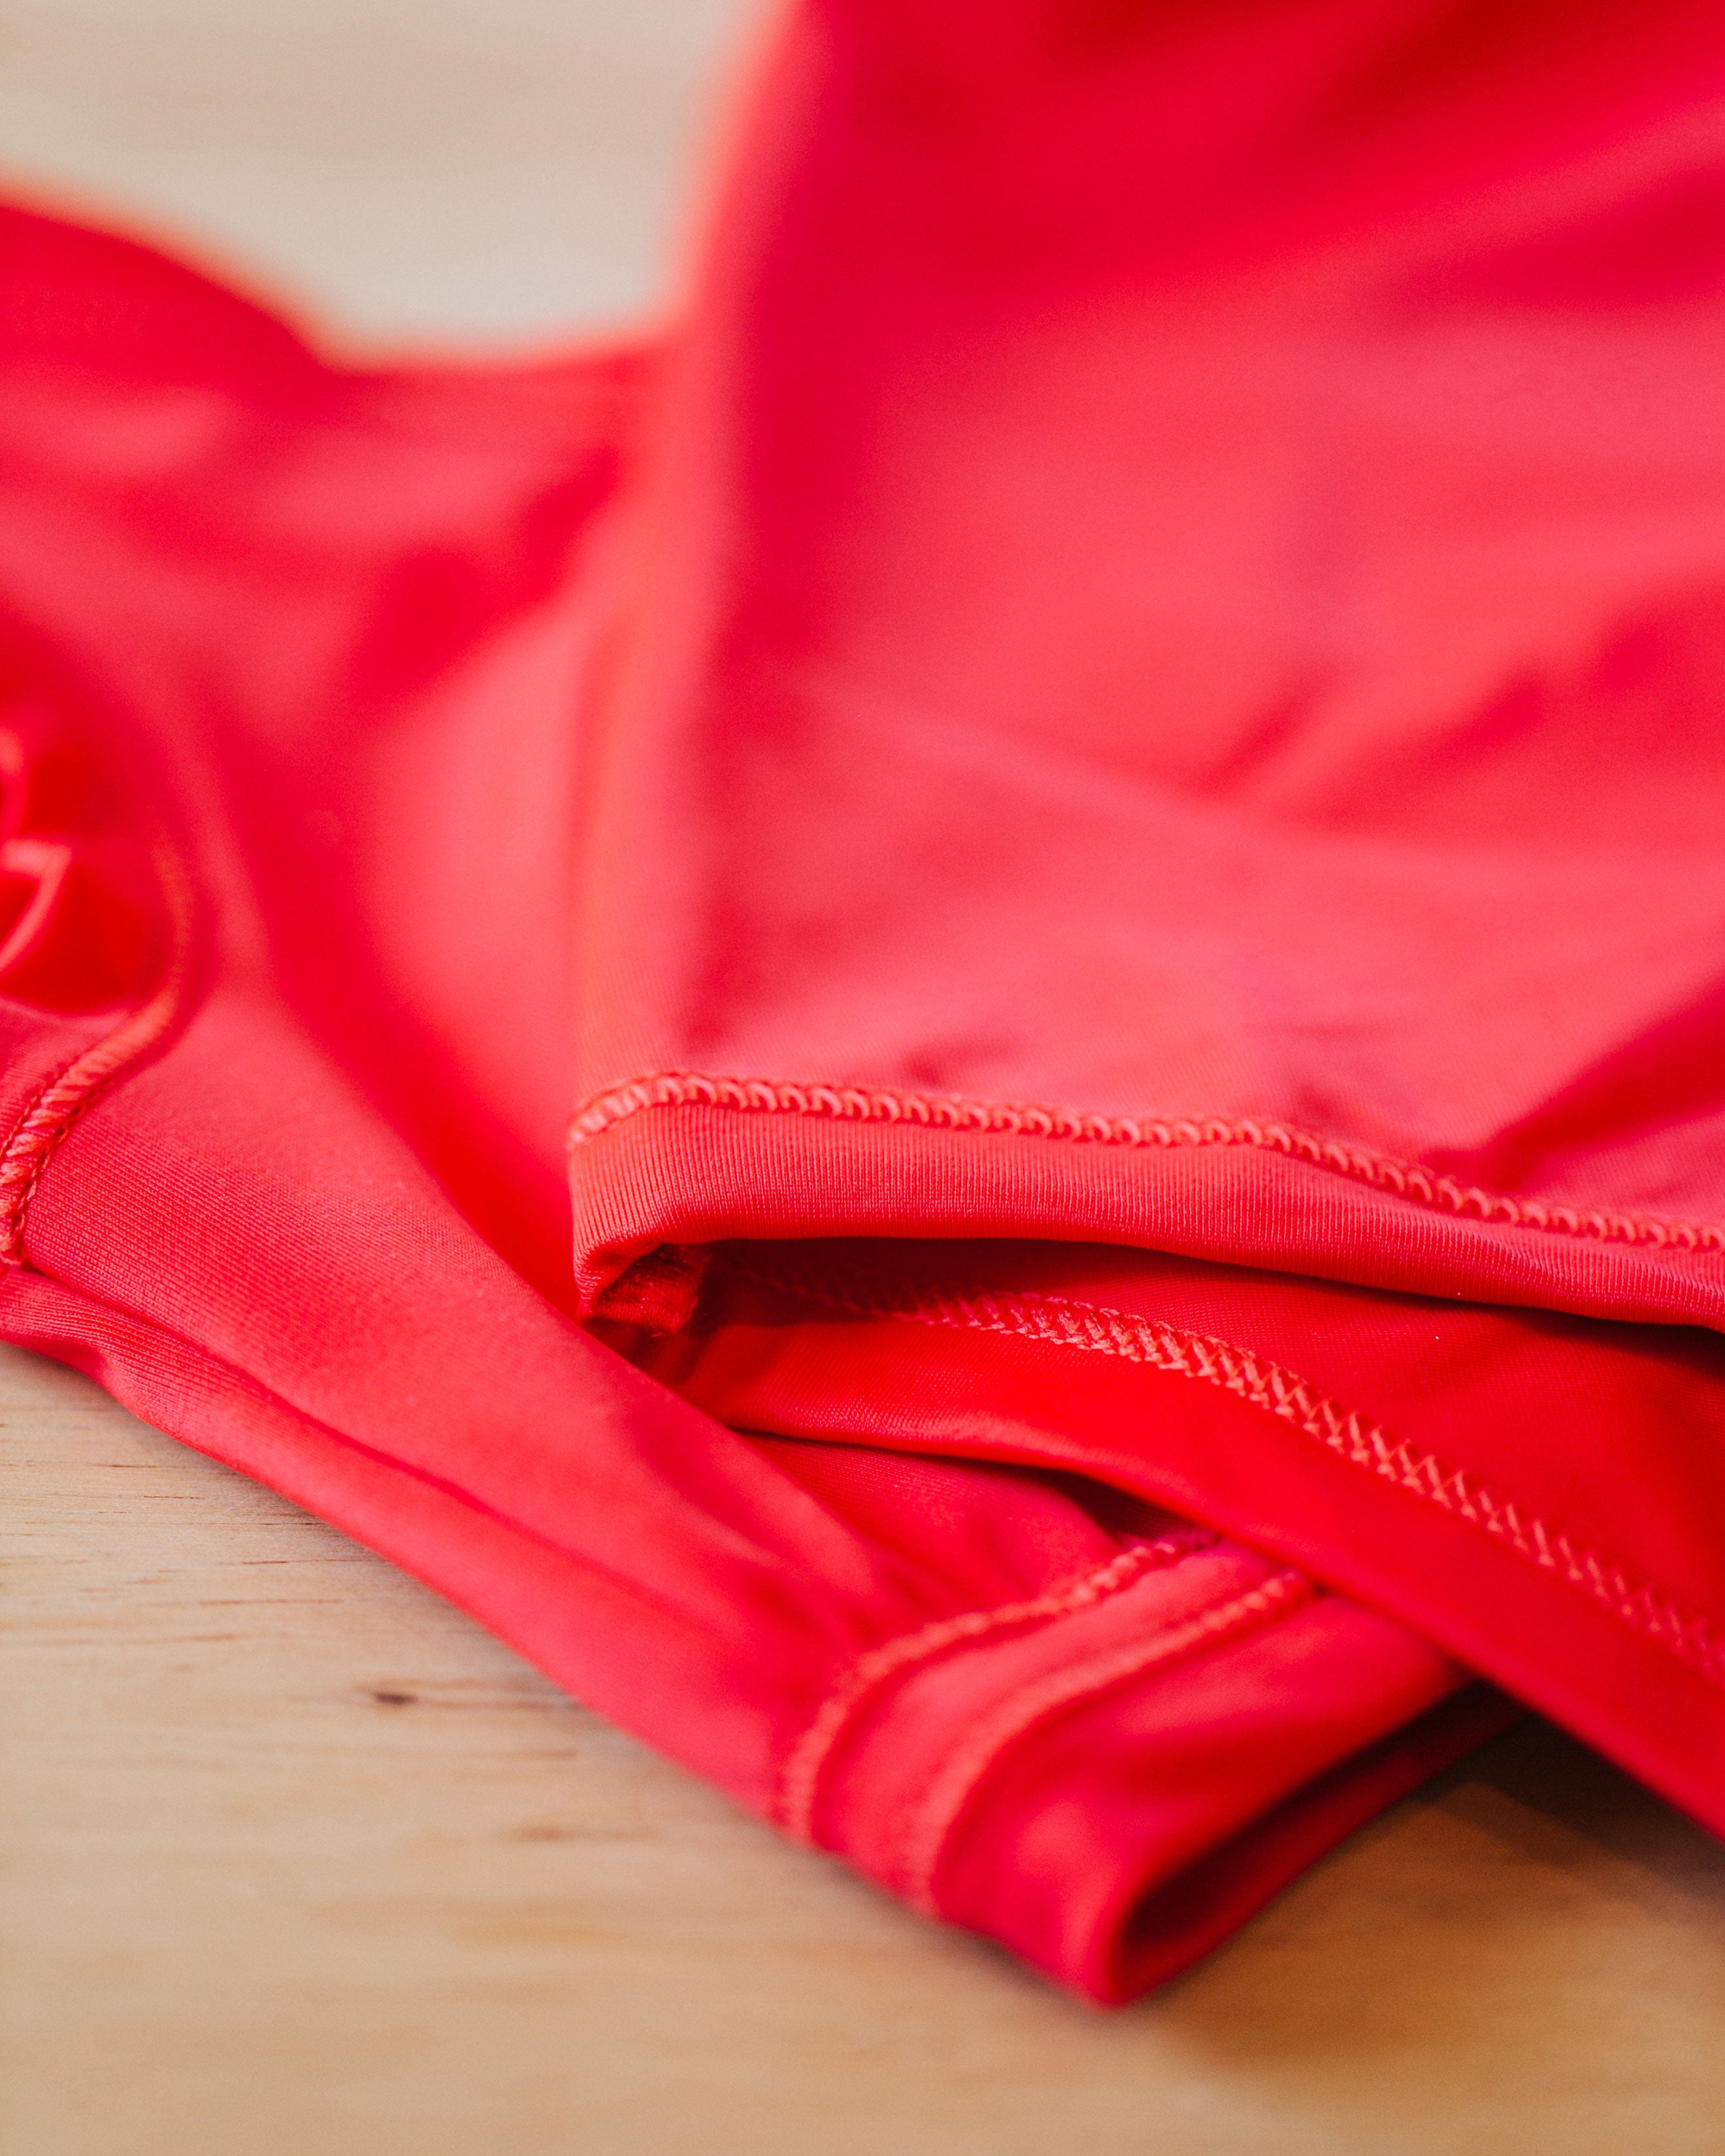 Close up of Classic Red Swimwear, showing stitching and details.